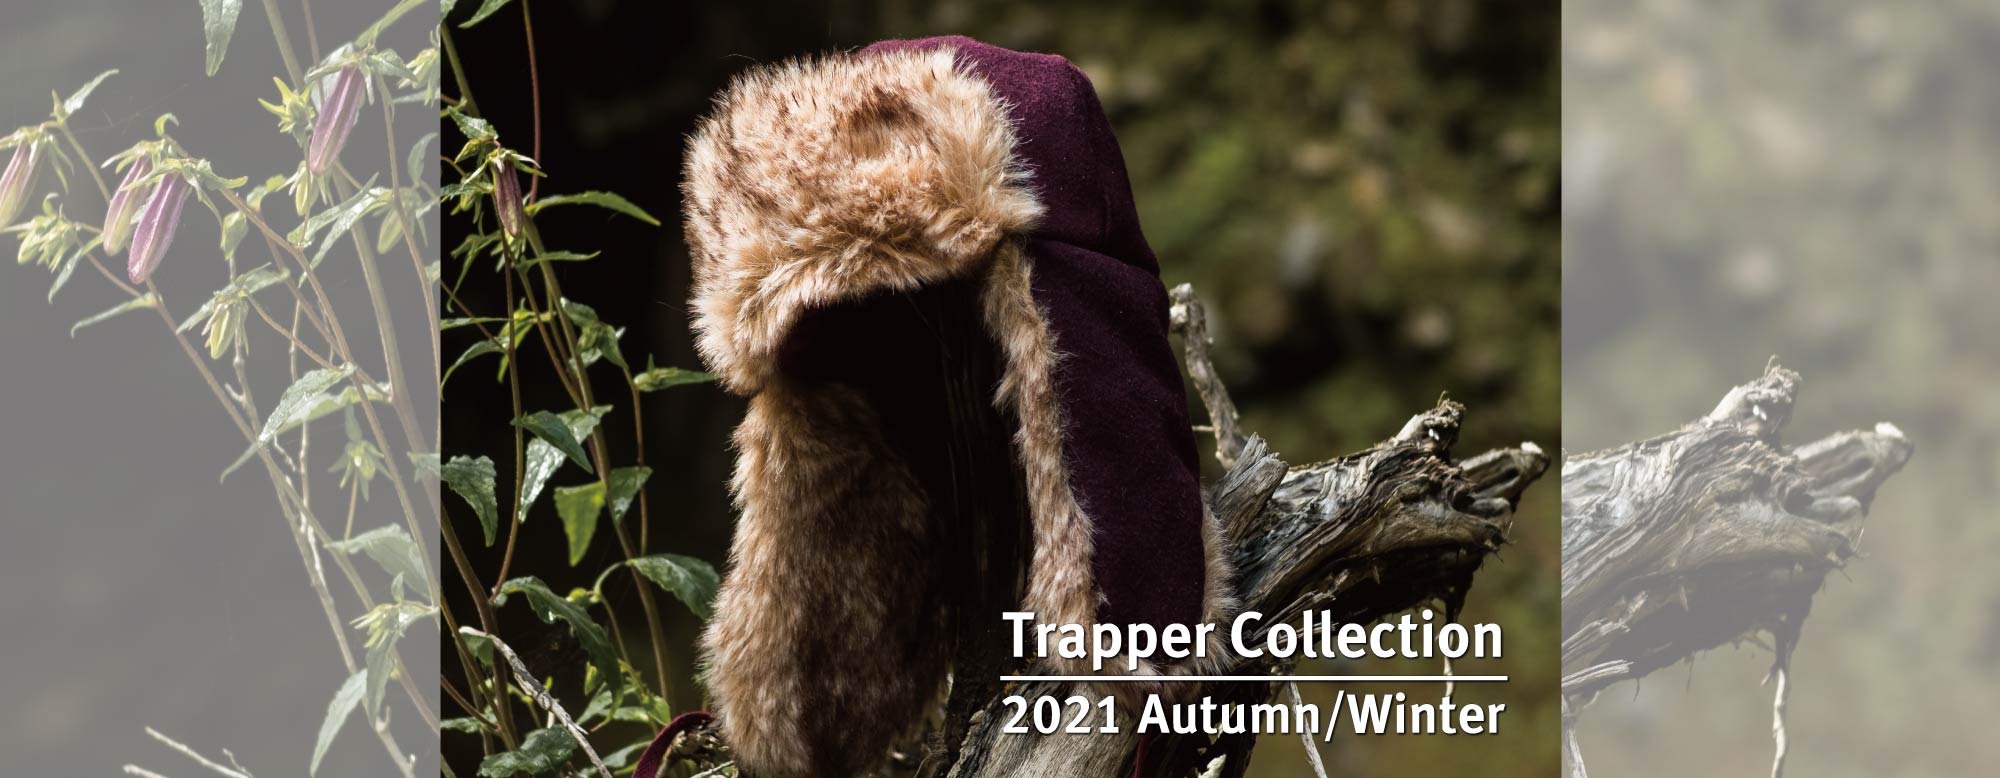 【2021A/W Trapper Collection】